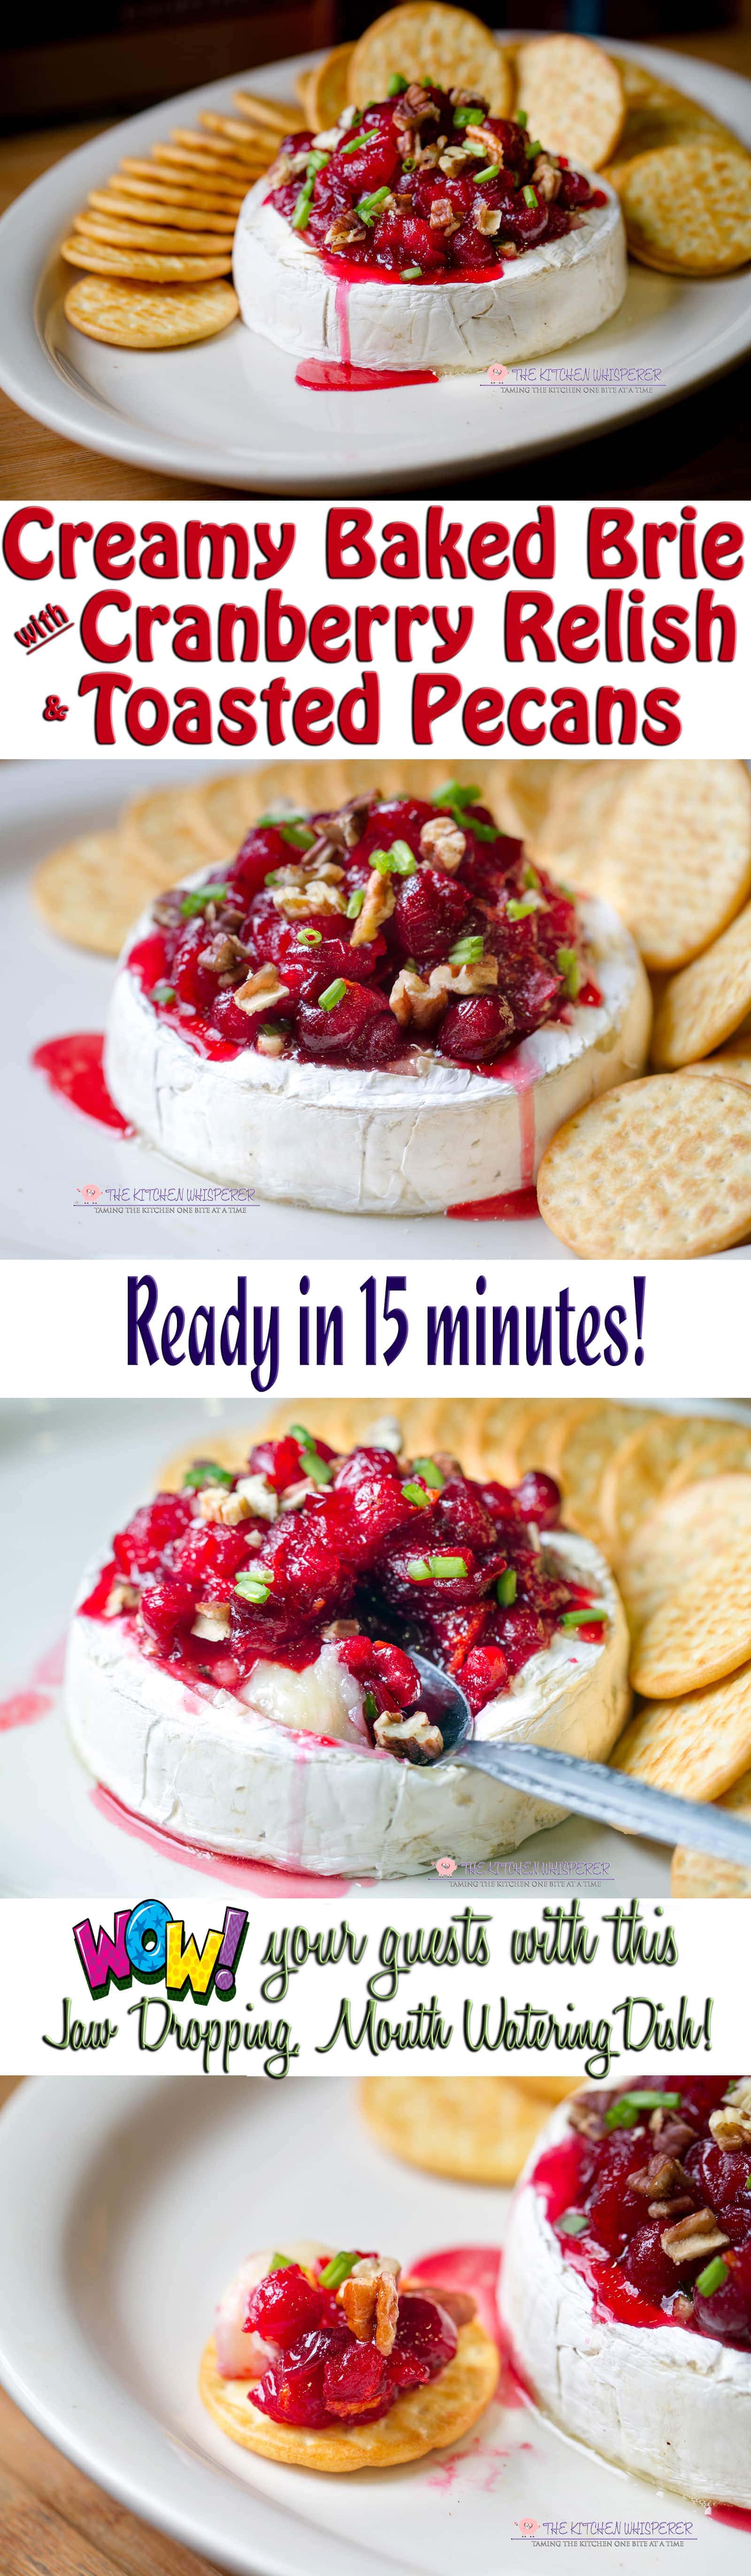 Creamy Baked Brie with Cranberry Relish & Toasted Pecans f